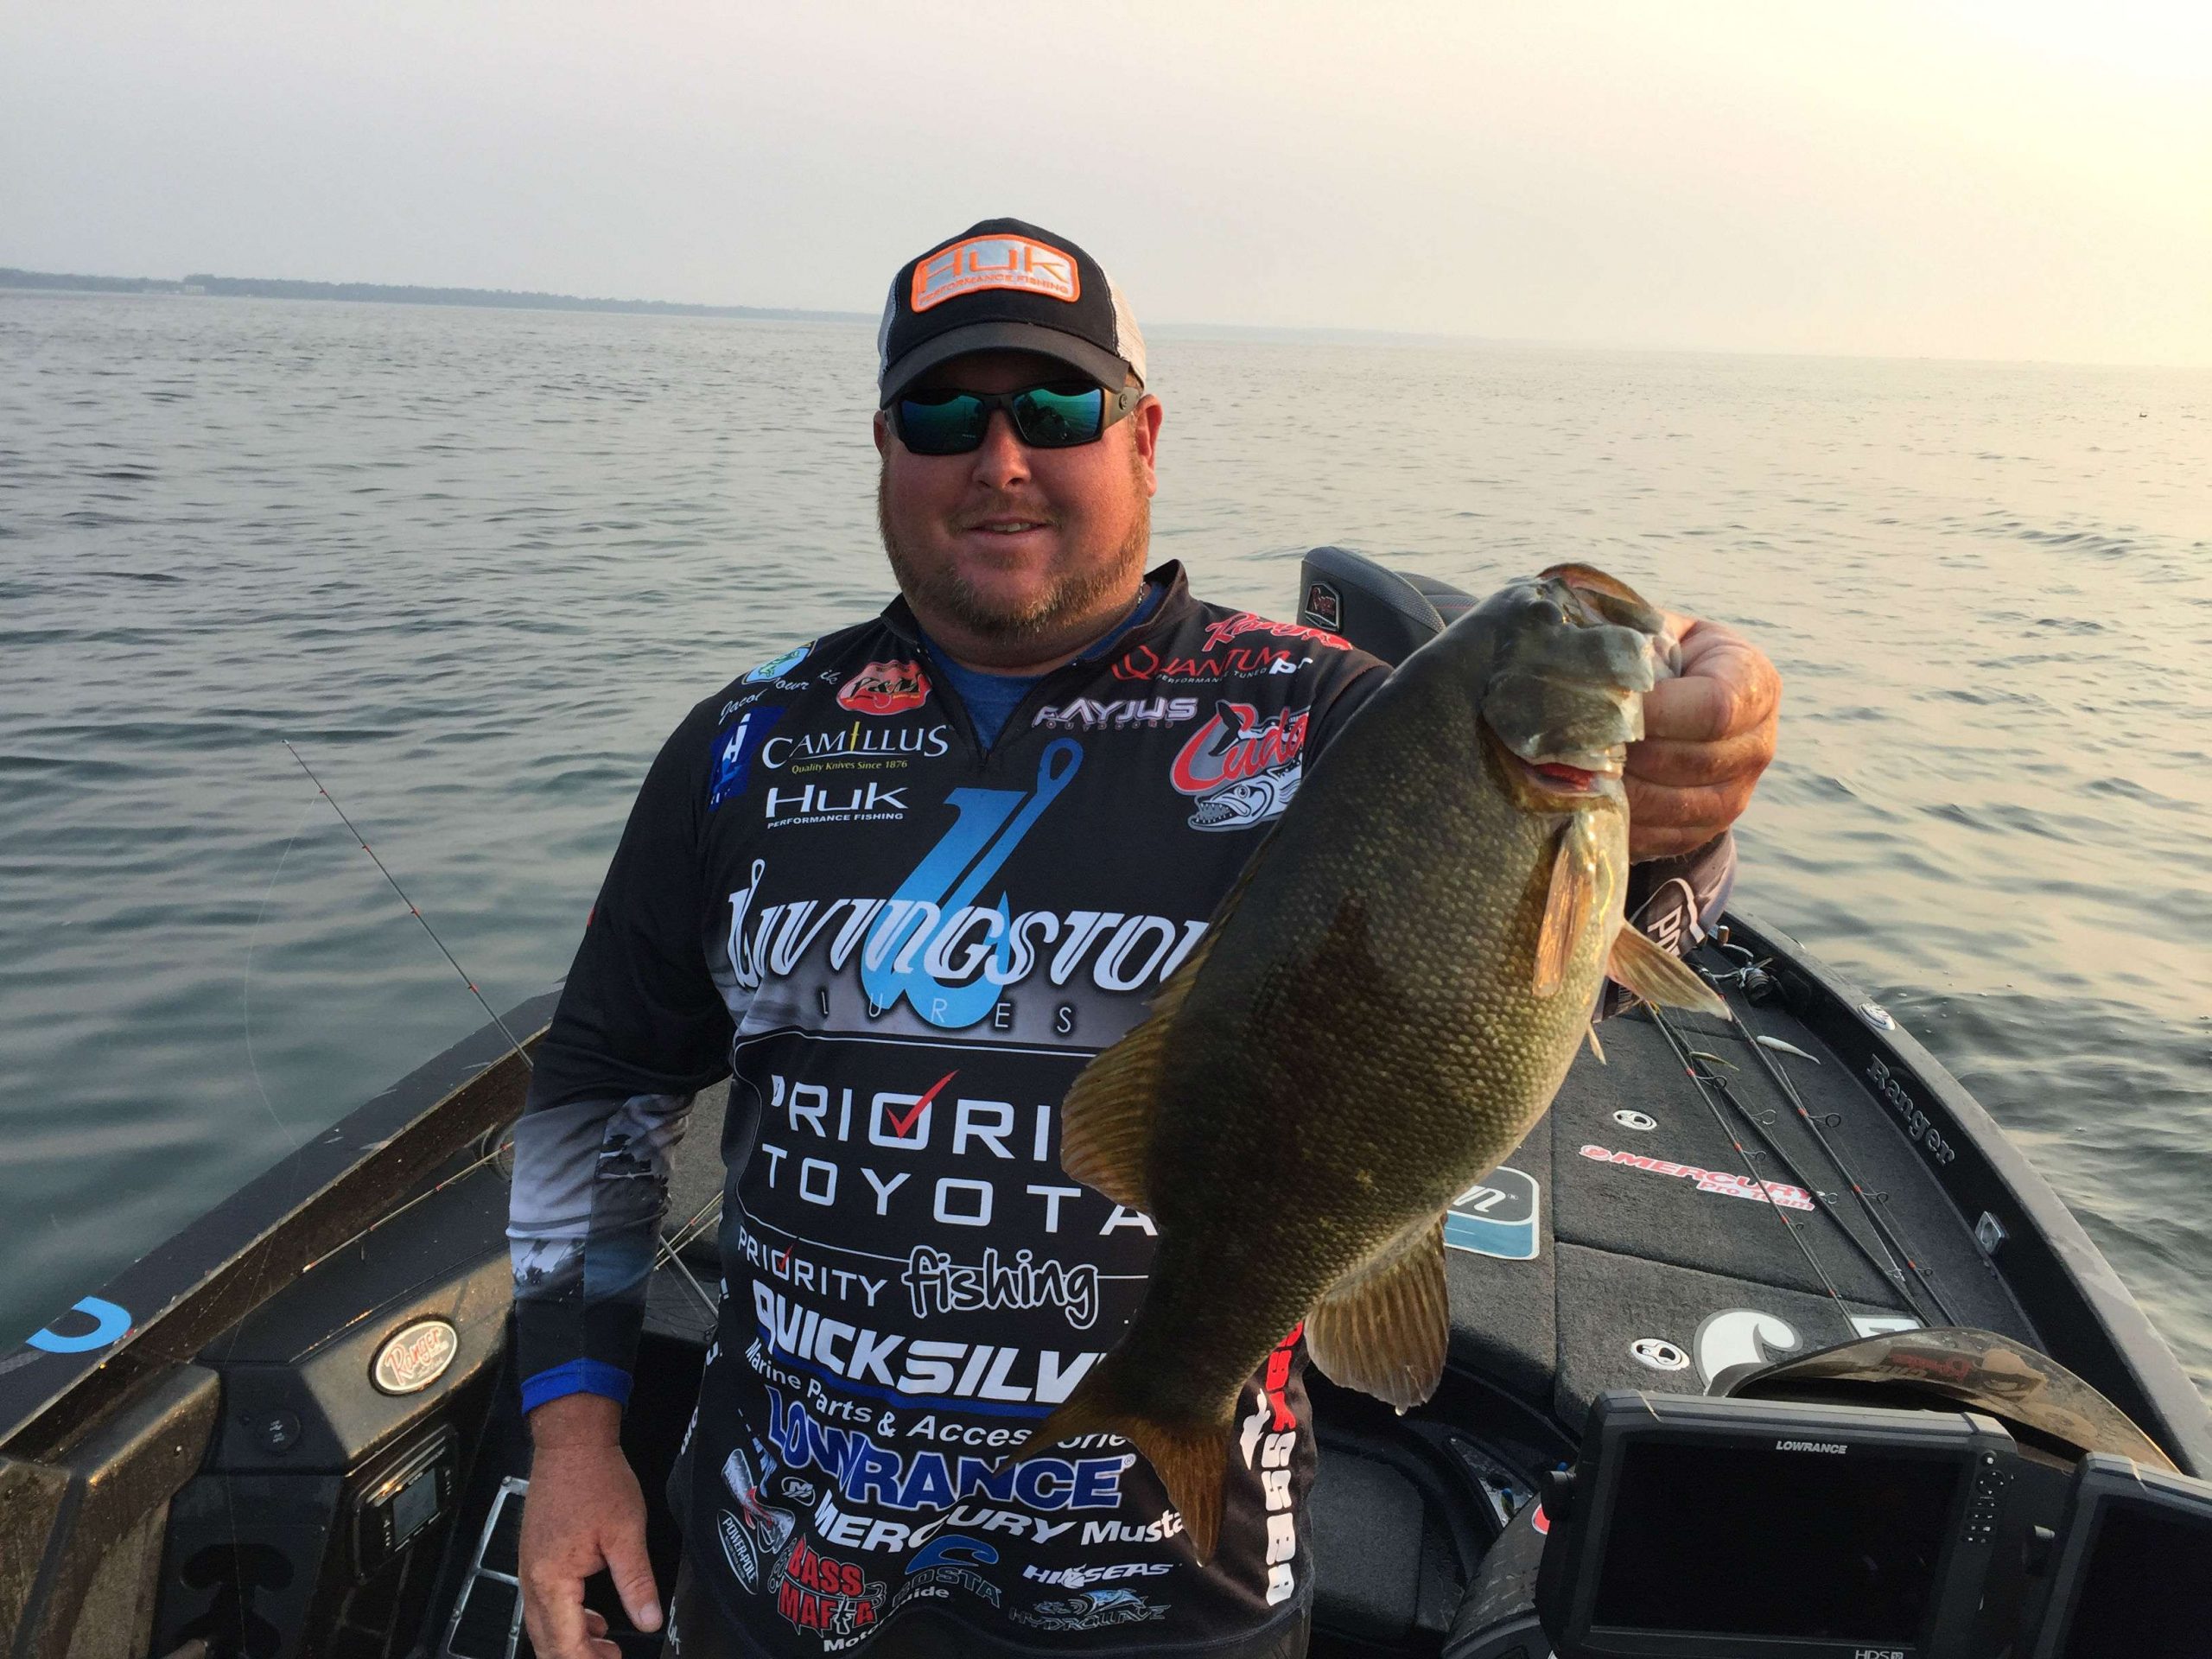 Powroznik is on the board with a chunk!